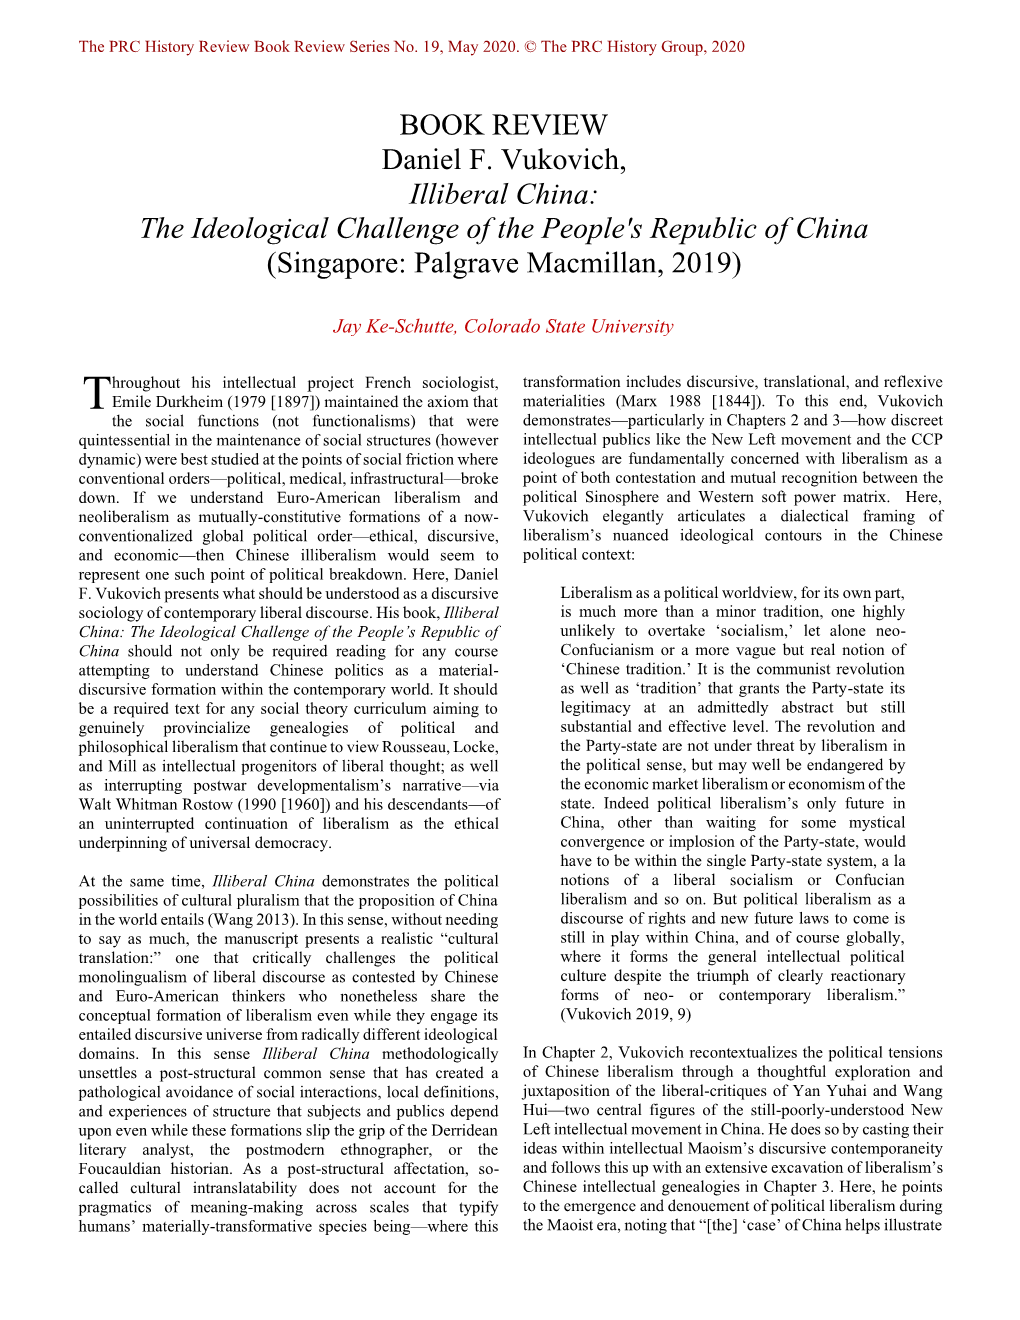 BOOK REVIEW Daniel F. Vukovich, Illiberal China: the Ideological Challenge of the People's Republic of China (Singapore: Palgrave Macmillan, 2019)